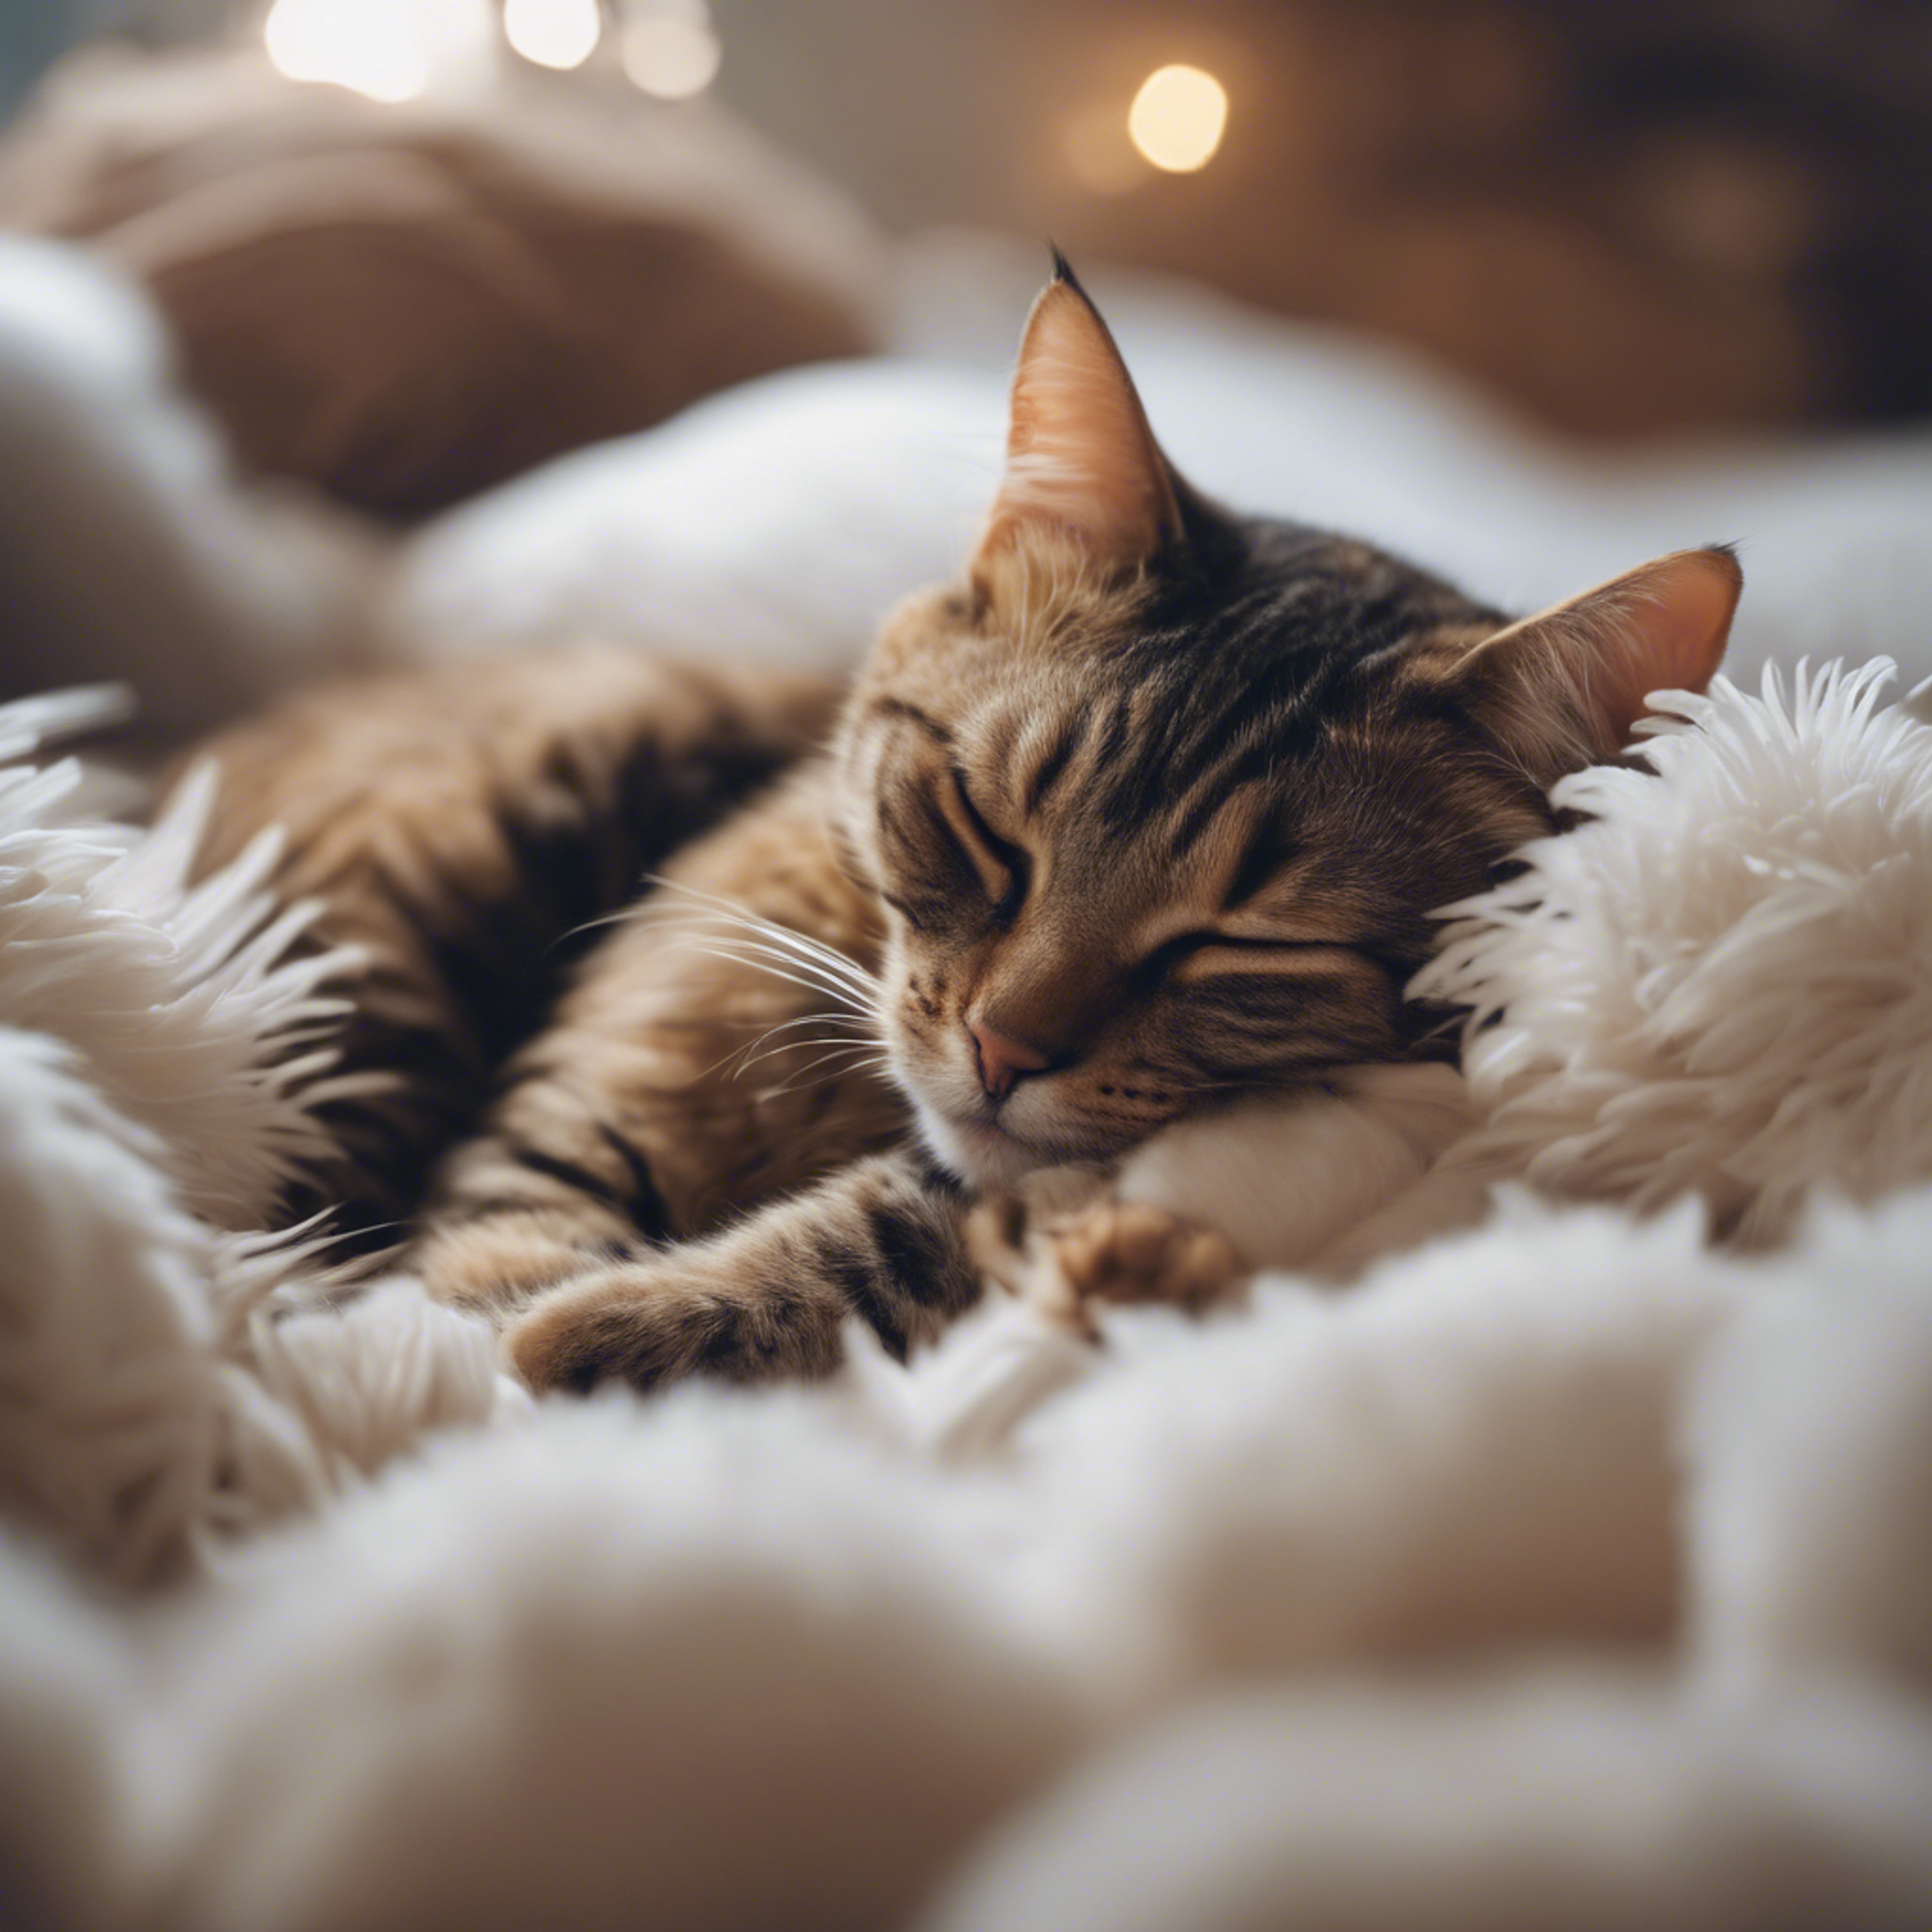 A cat sleeping soundly, completely submerged in a sea of cozy, fluffy pillows. Tapeta na zeď[9e78fe4df88a4e90bb06]